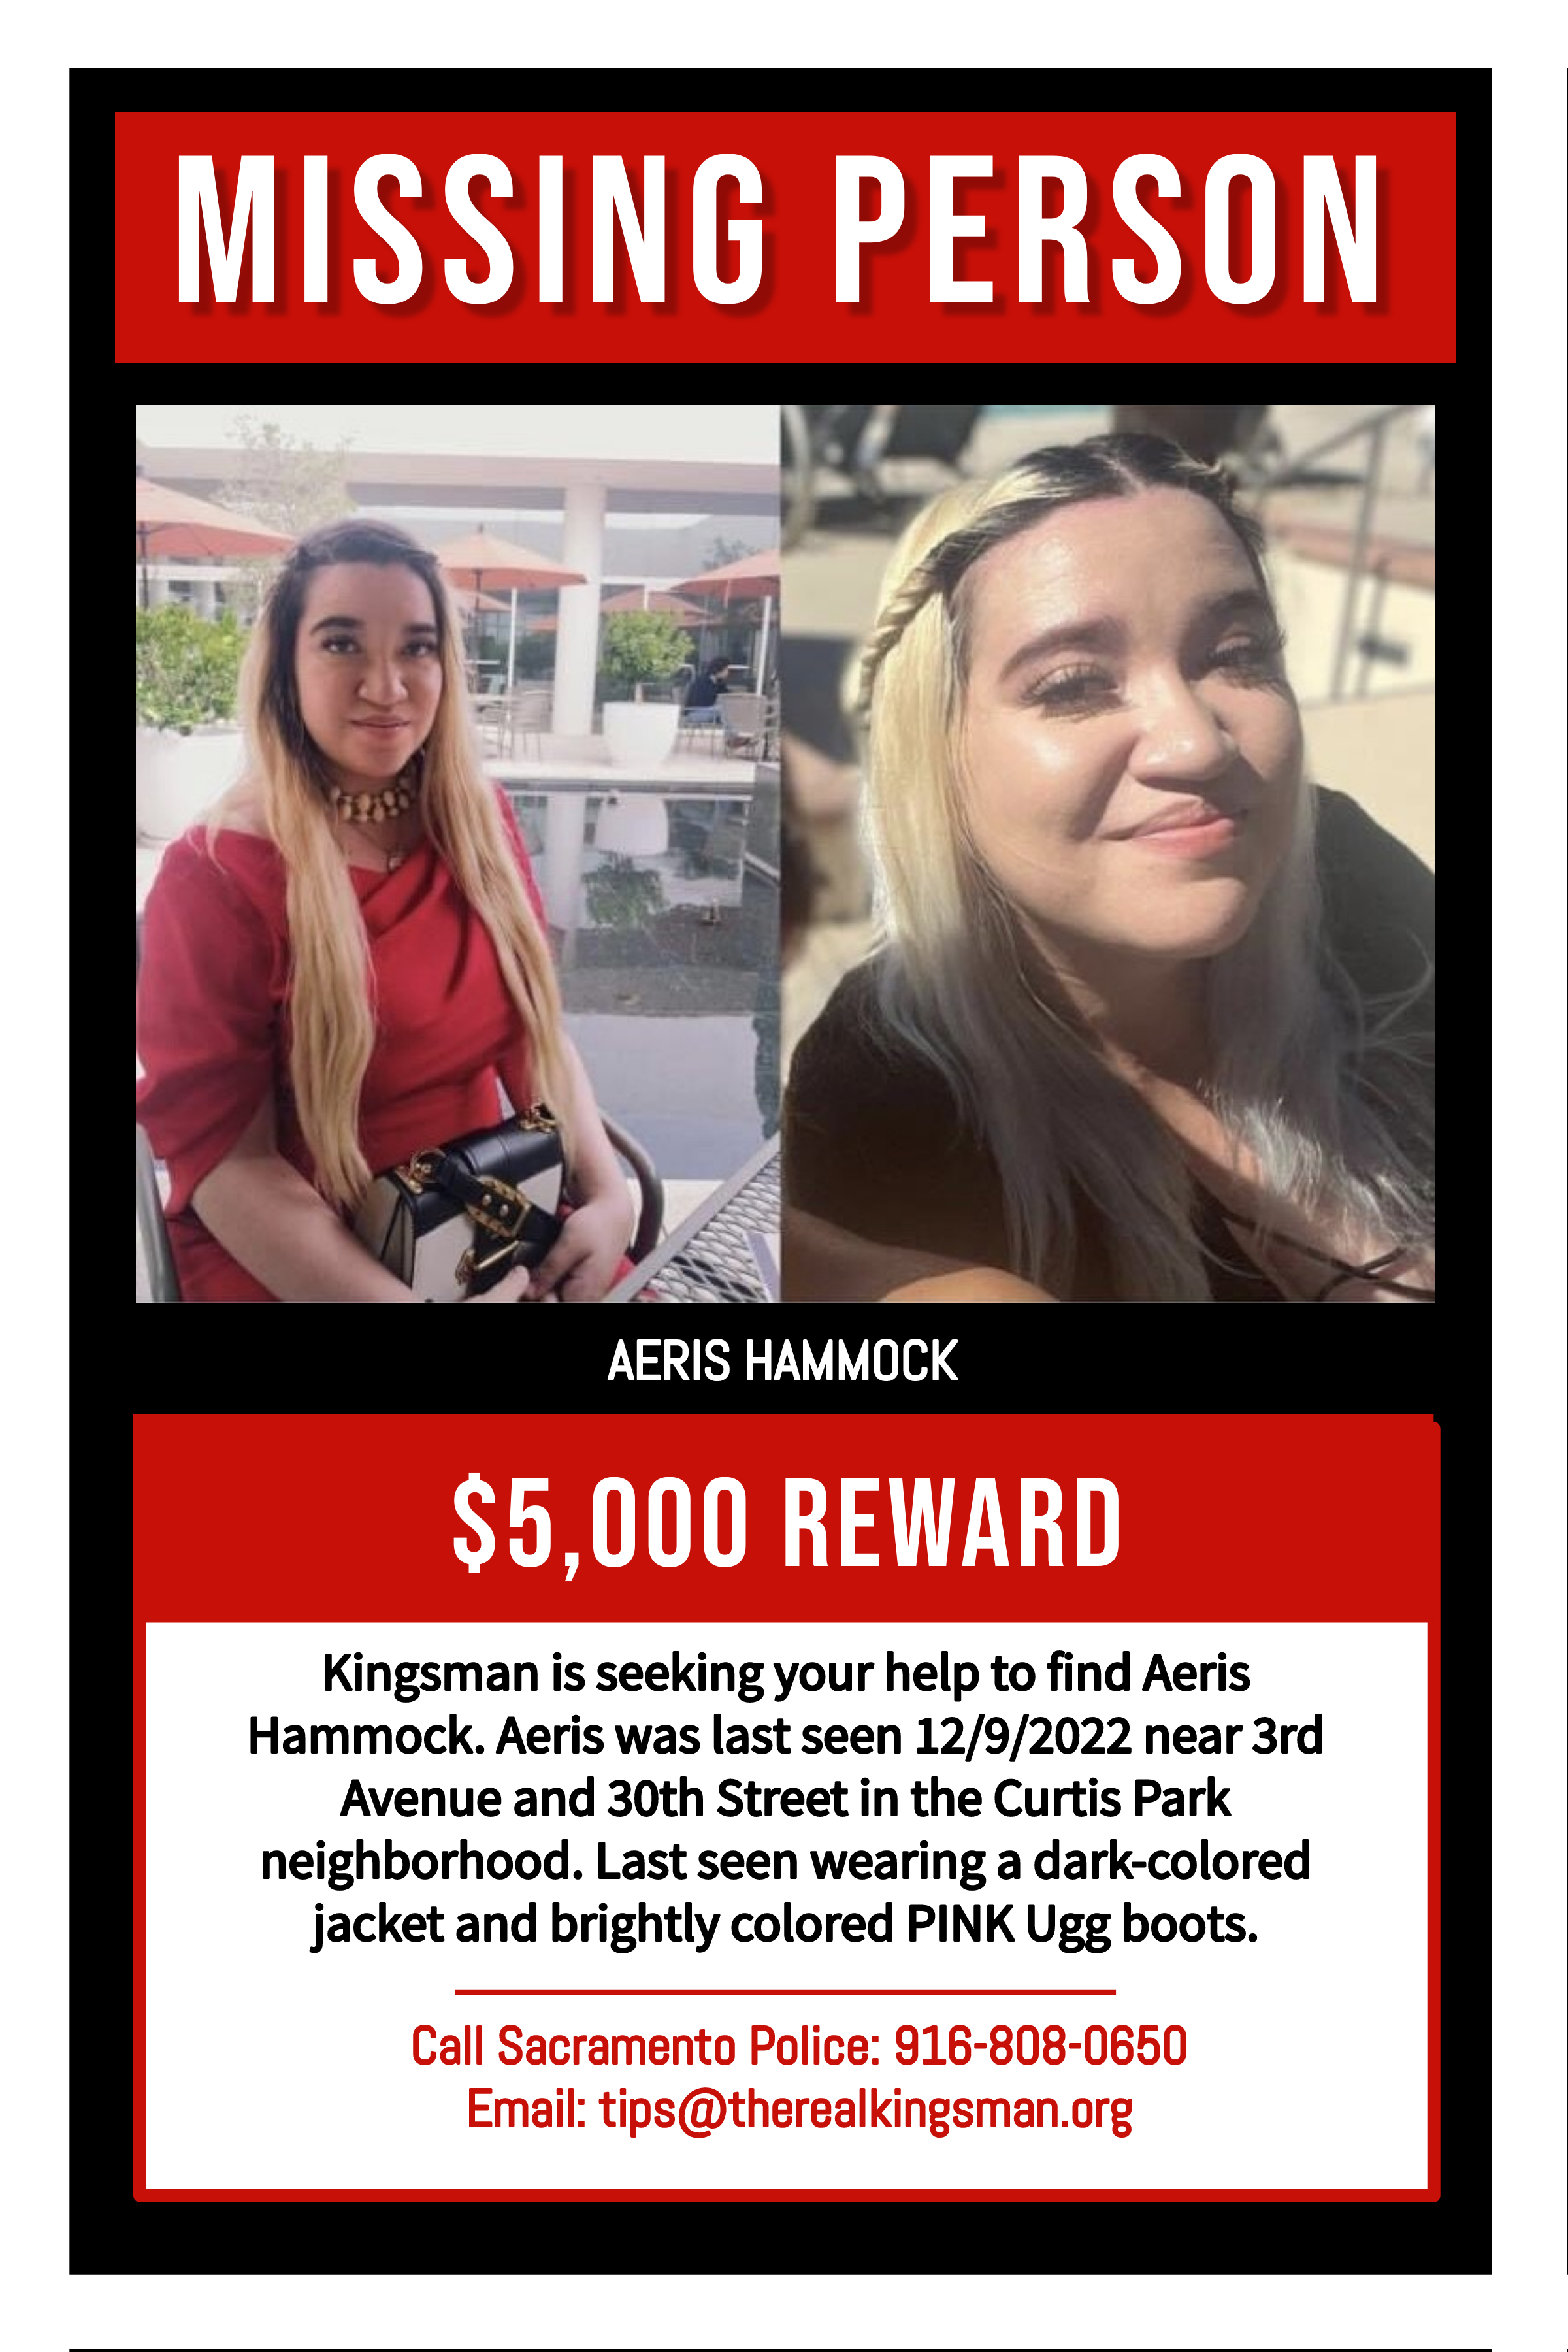 Aeris Hammock, a 24-year-old woman, has been reported missing. USPA Nationwide Security provides assistance